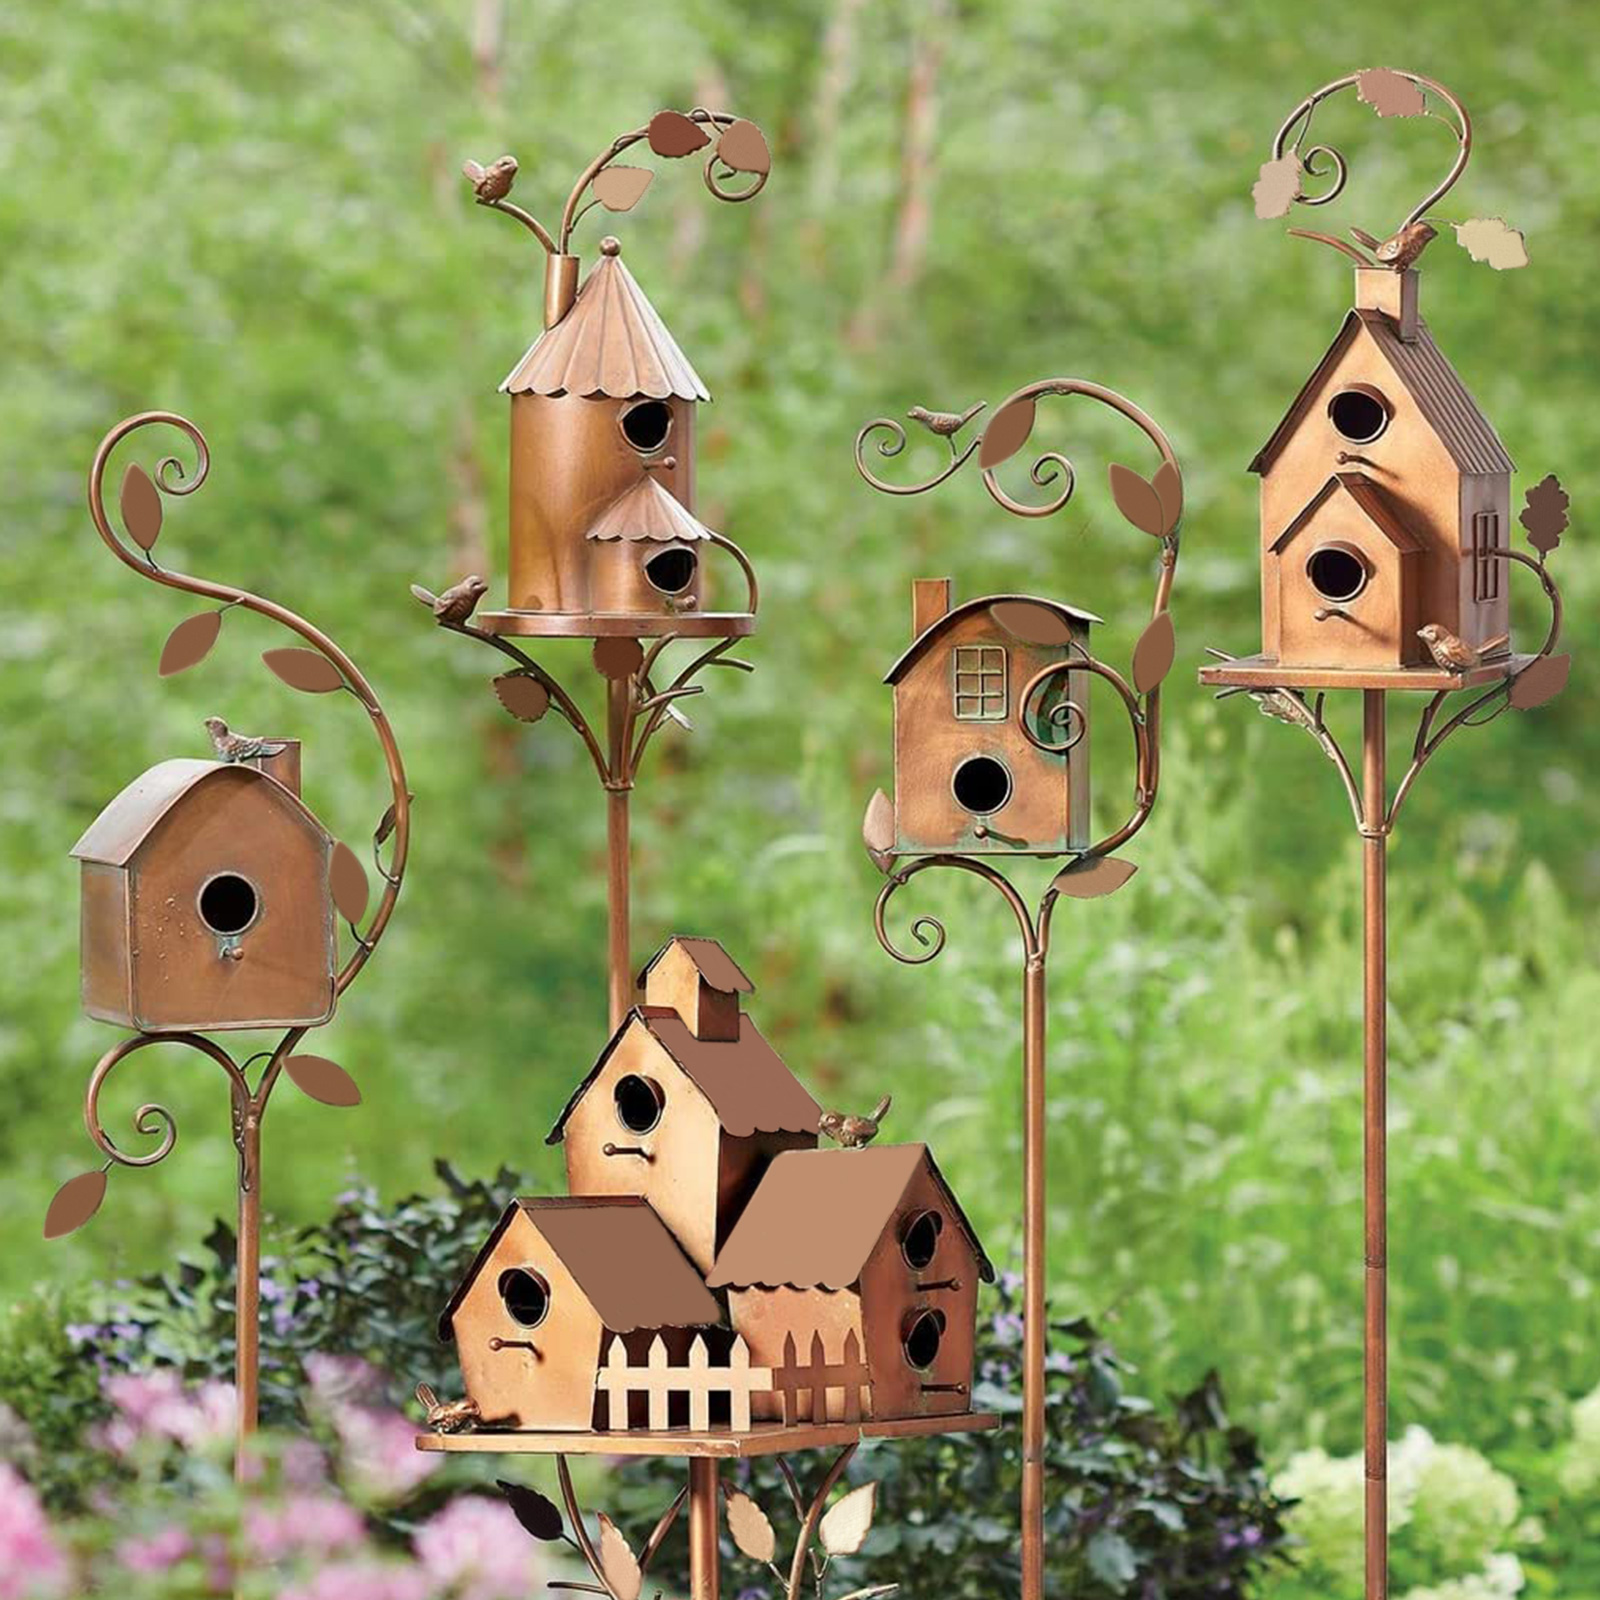 Asdomo Metal Birdhouse Garden Stakes Bird's Nest Multi-size Yellow Easy To Assemble Resting Place For Birds - image 4 of 9